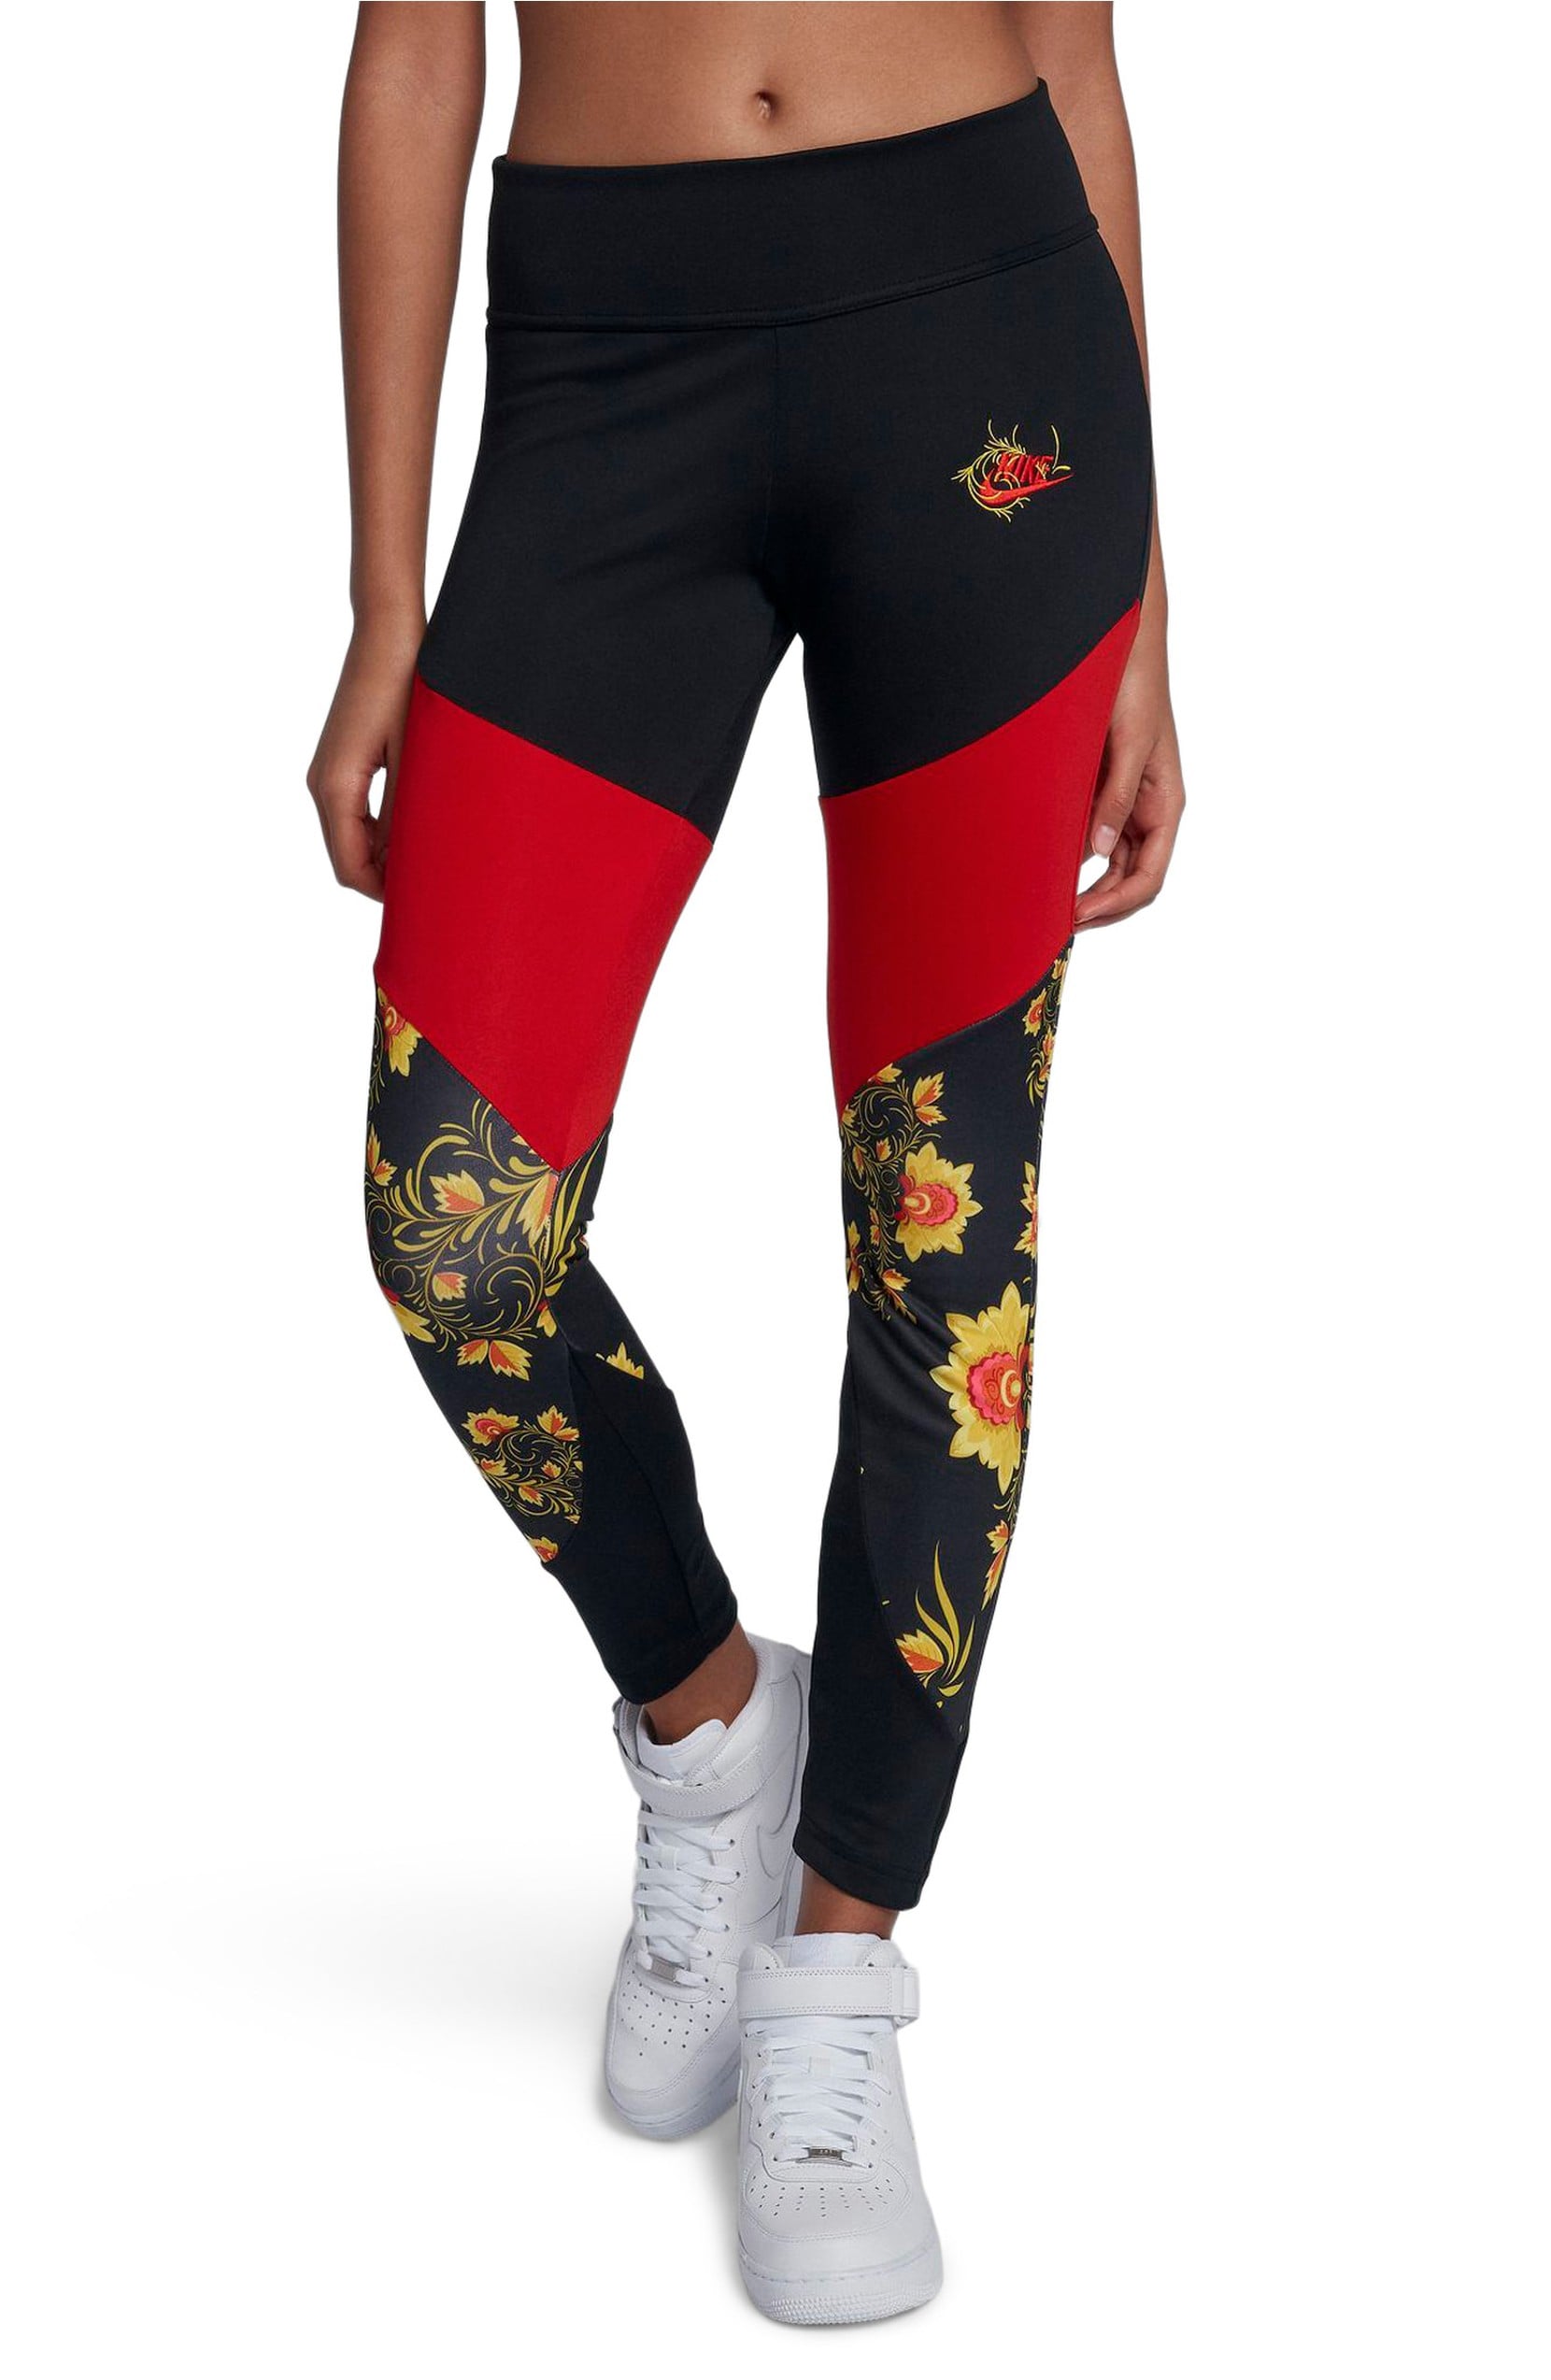 Sportswear Essential Floral Leggings We've the Cutest at Nordstrom so You Can Workout in Style | POPSUGAR Fitness Photo 9